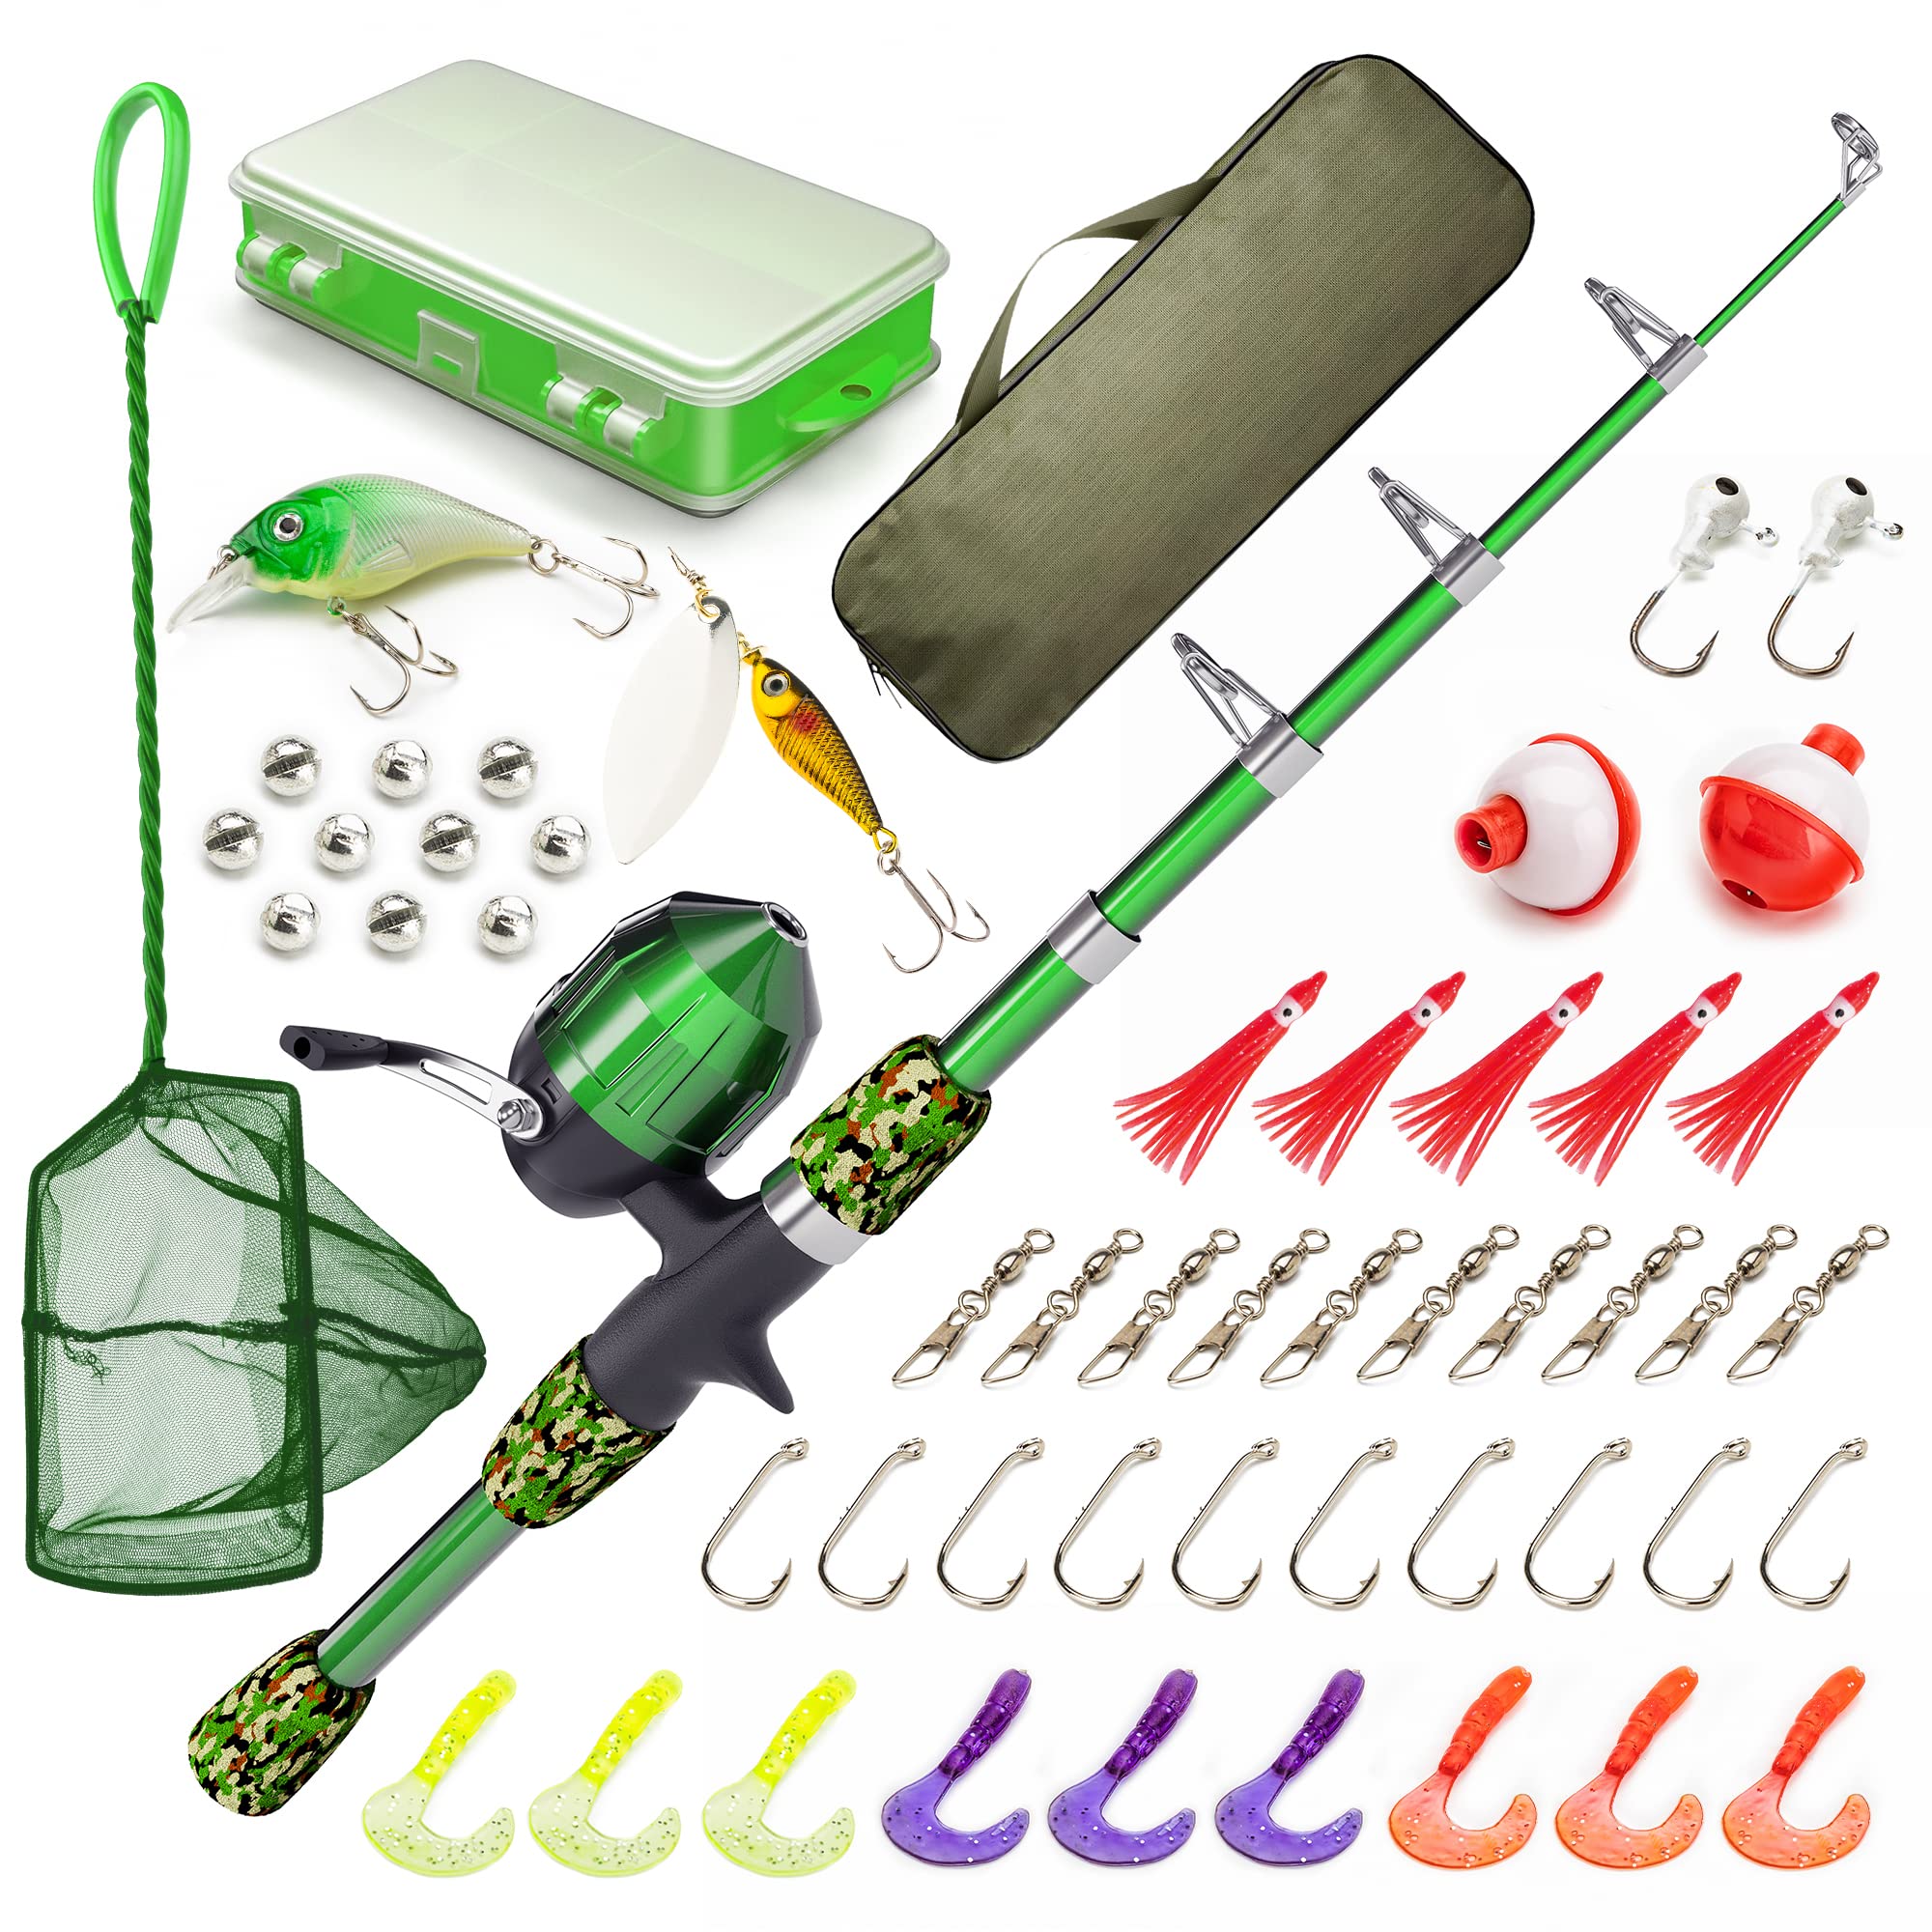 Lanaak Kids Fishing Pole And Tackle Box - With Net, Travel Bag, Reel And Beginners Guide - Rod And Reel Kit For Boys, Girls, Or Youth